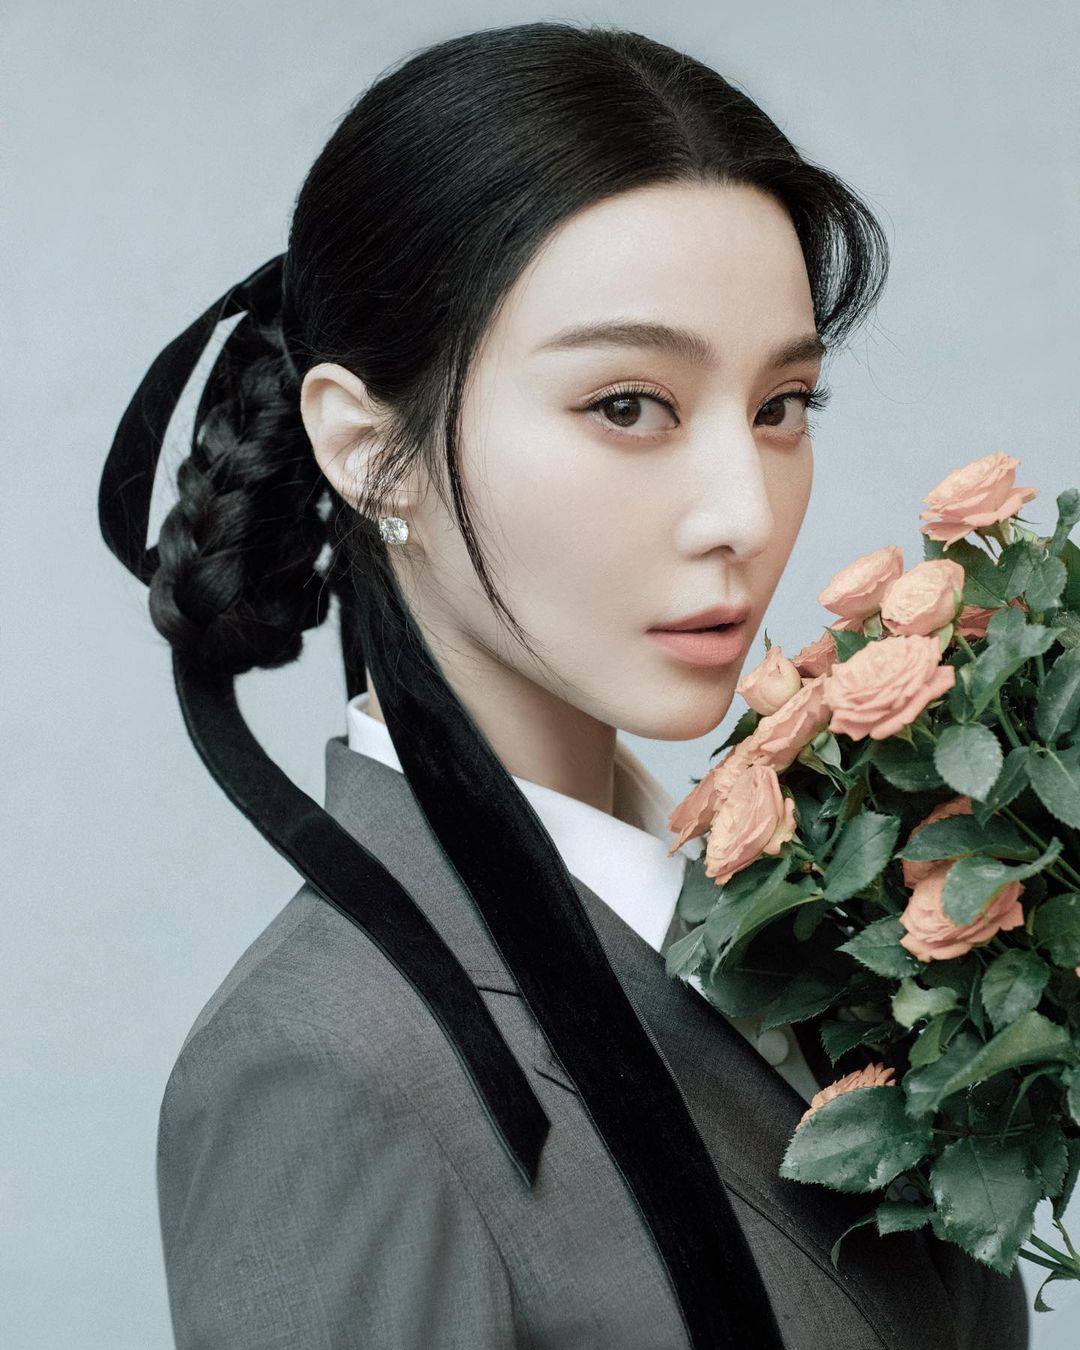 Chinese actress Fan Bingbing is set to make her K-drama debut with the series Insider, according to the latest K-drama casting news. Photo: Instagram.